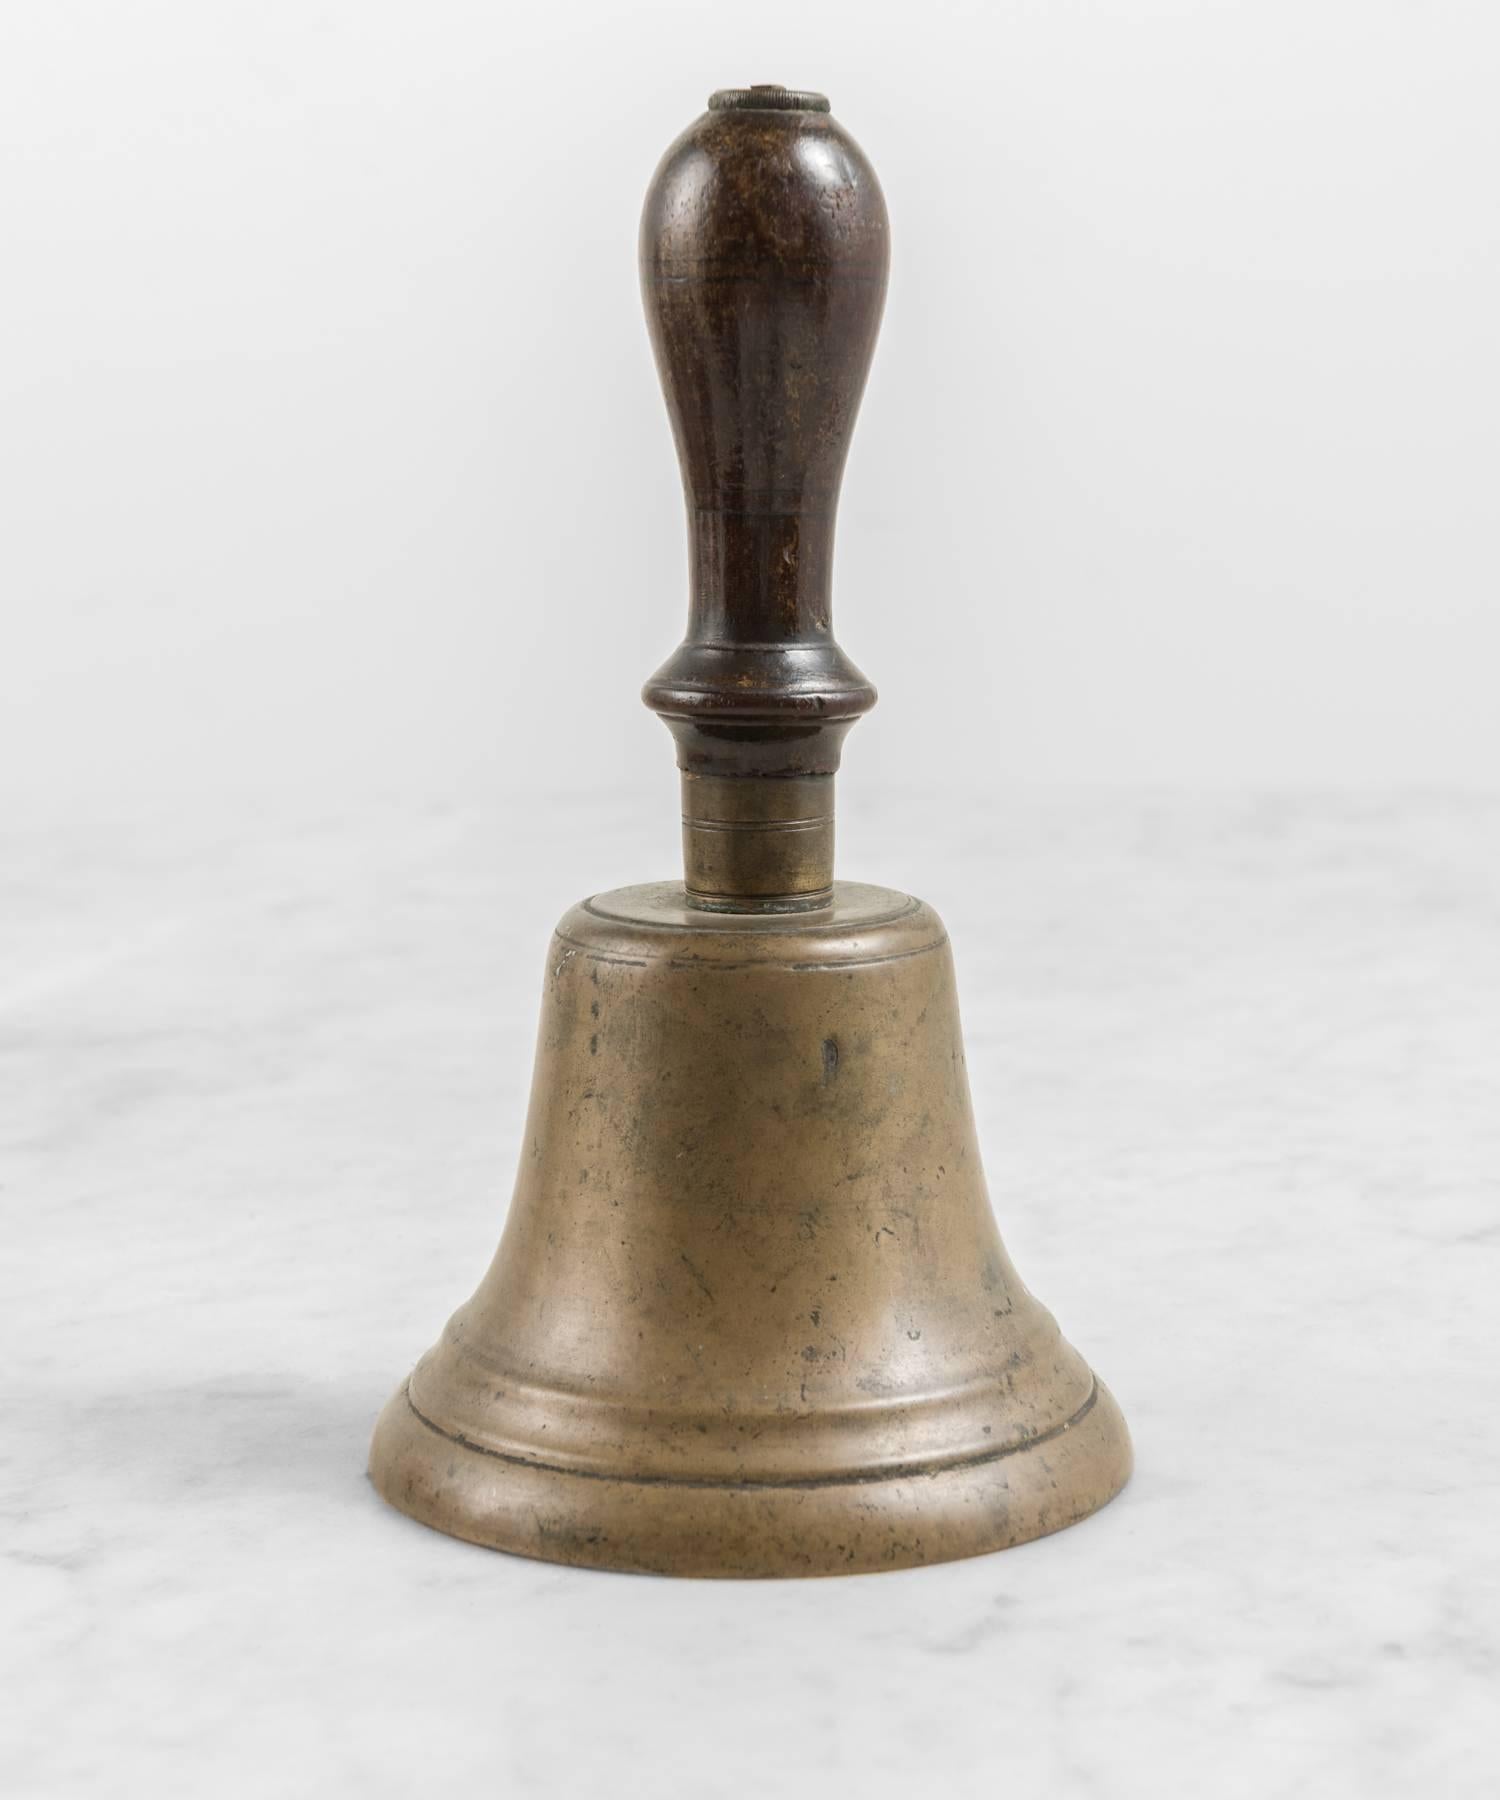 20th Century Medium Sized Bell with Wooden Handle, circa 1900-1940